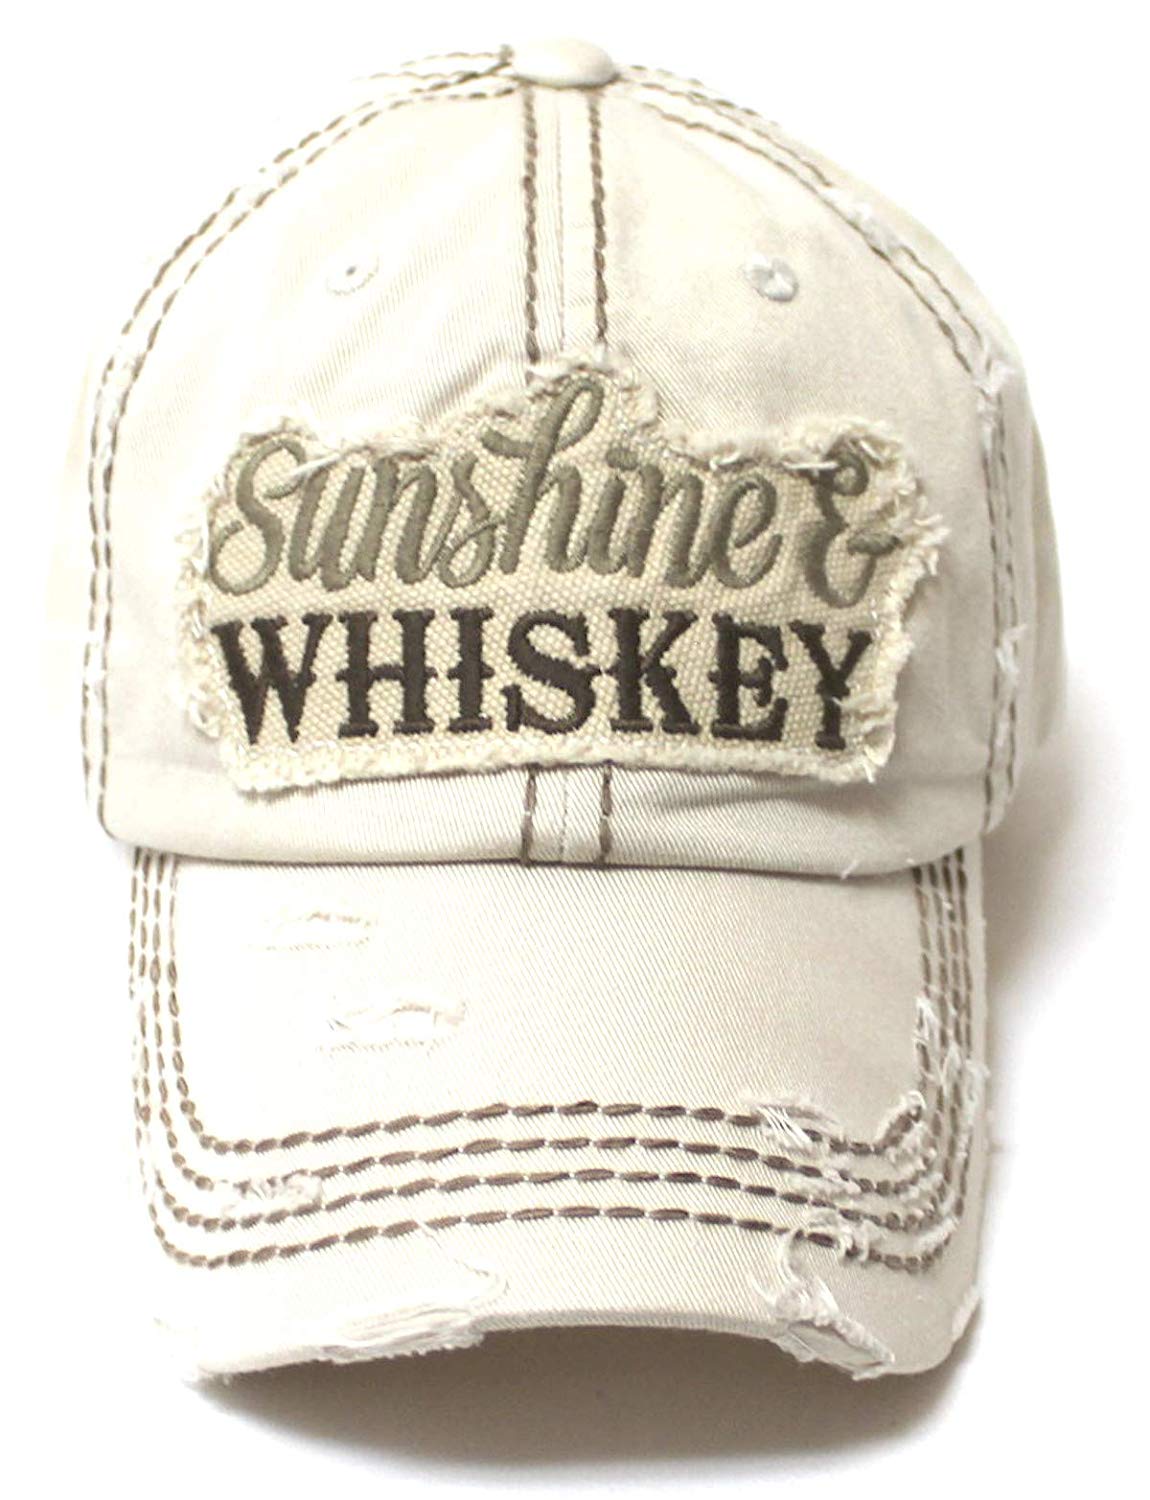 CAPS 'N VINTAGE Women's Accessory Ballcap Sunshine & Whiskey Patch Embroidery Baseball Hat, Stone - Caps 'N Vintage 